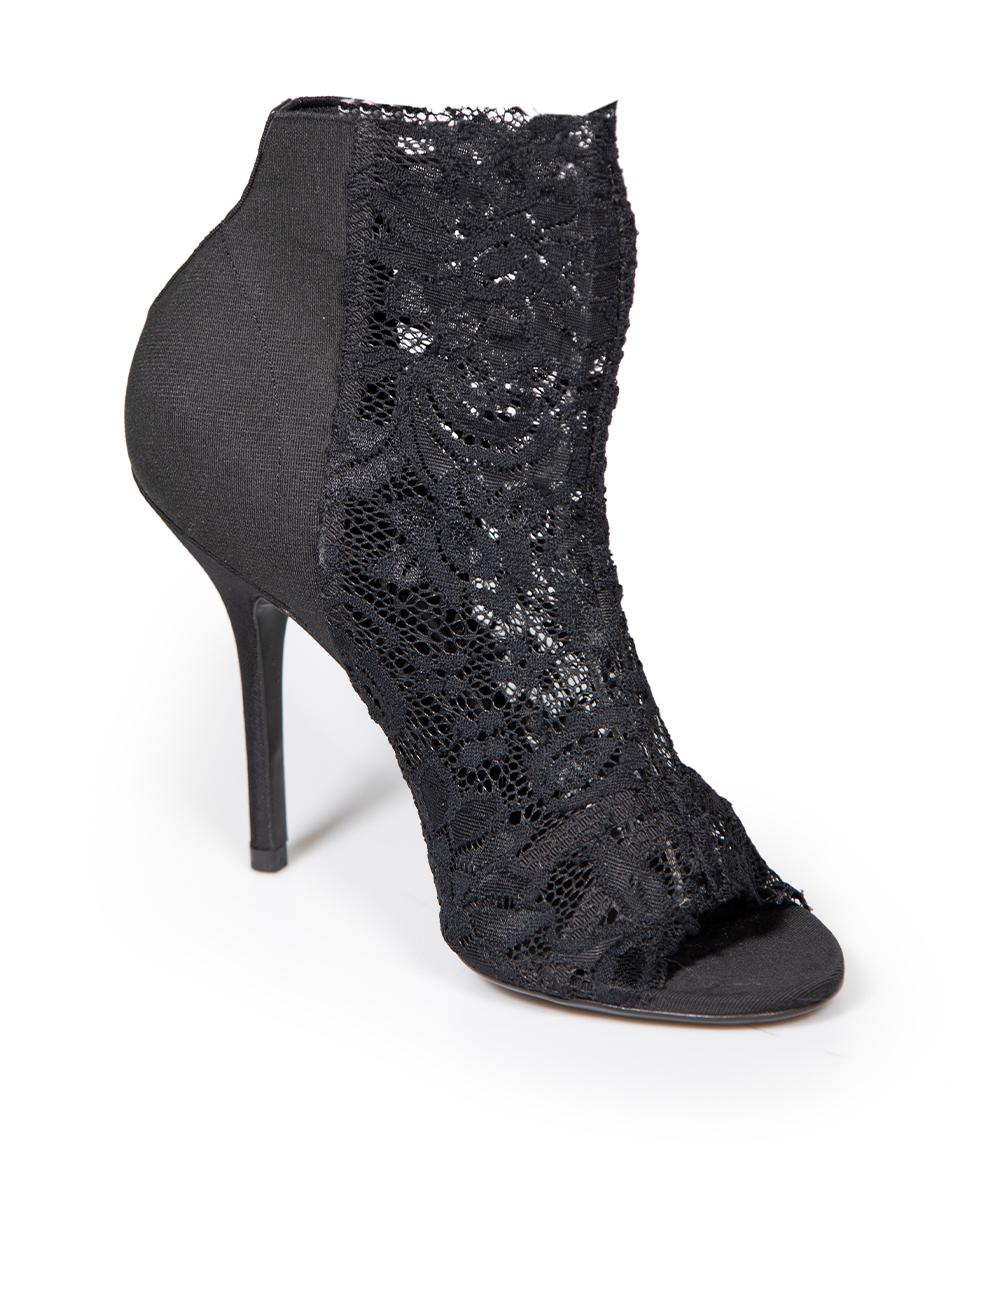 CONDITION is Very good. Minimal wear to heels is evident. Minimal wear to the lace panelling with one or two plucks to the weave found on this used Dolce & Gabbana designer resale item.
 
 Details
 Black
 Lace
 Heels
 Peep toe
 High heeled
 Slip on
